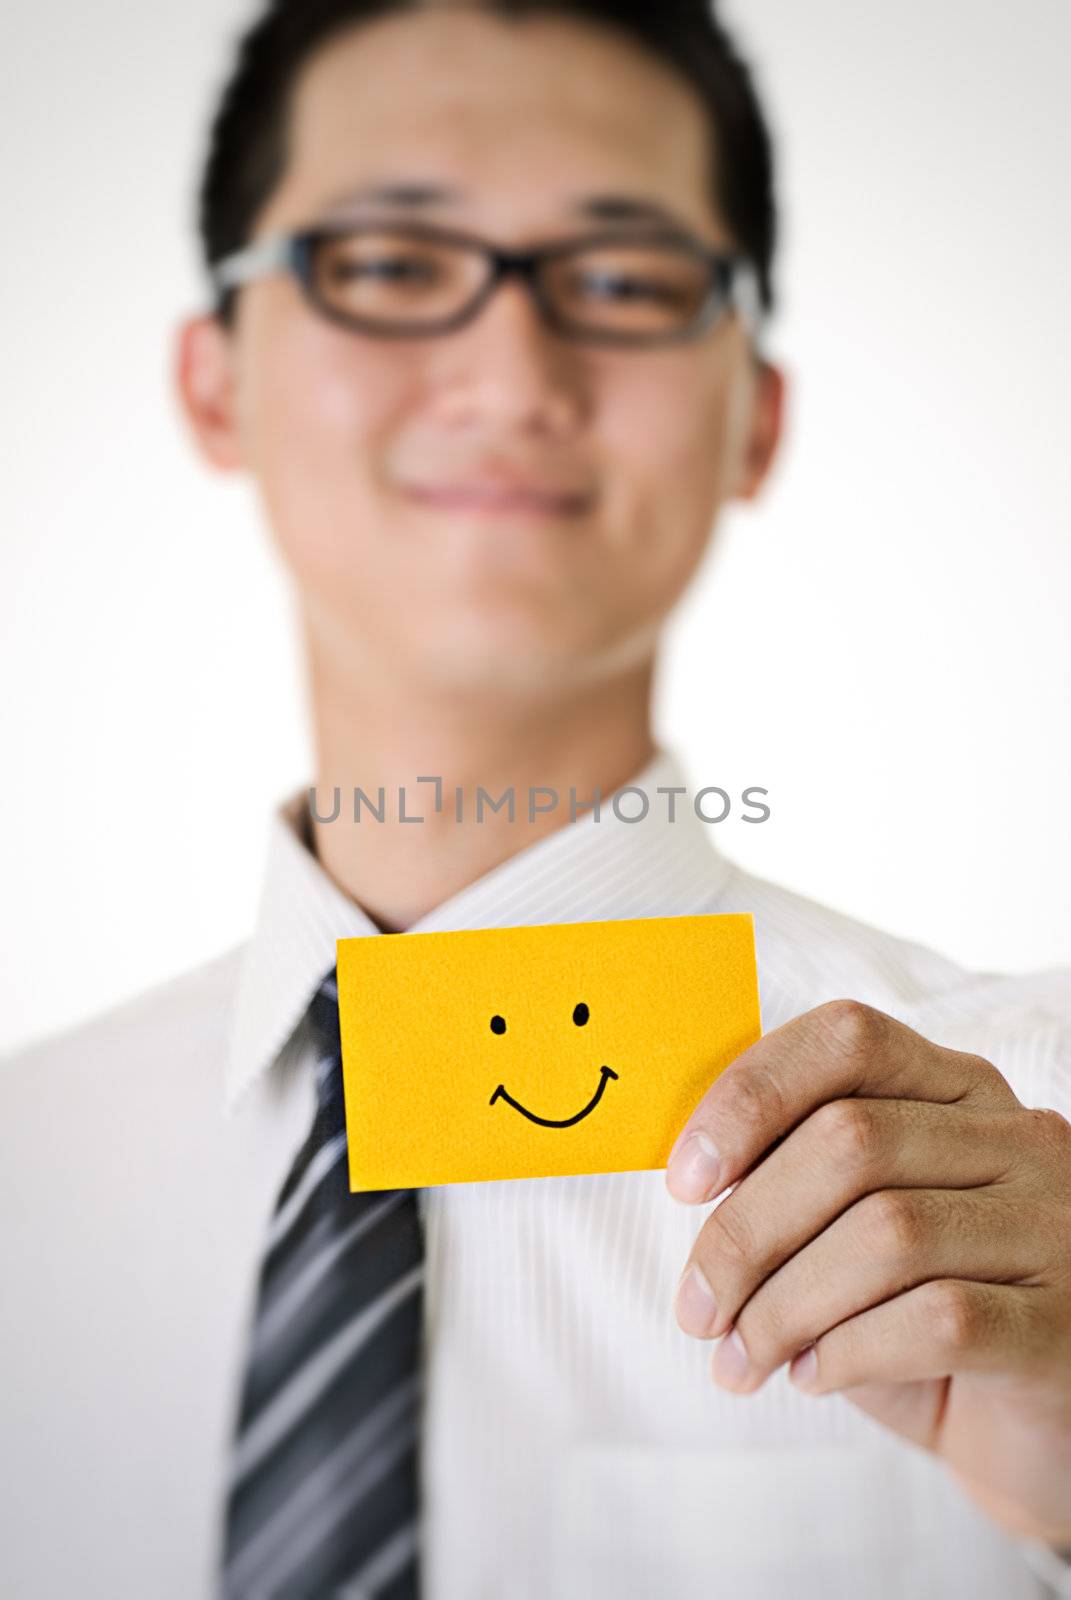 Smile pattern on yellow card hold by business man.